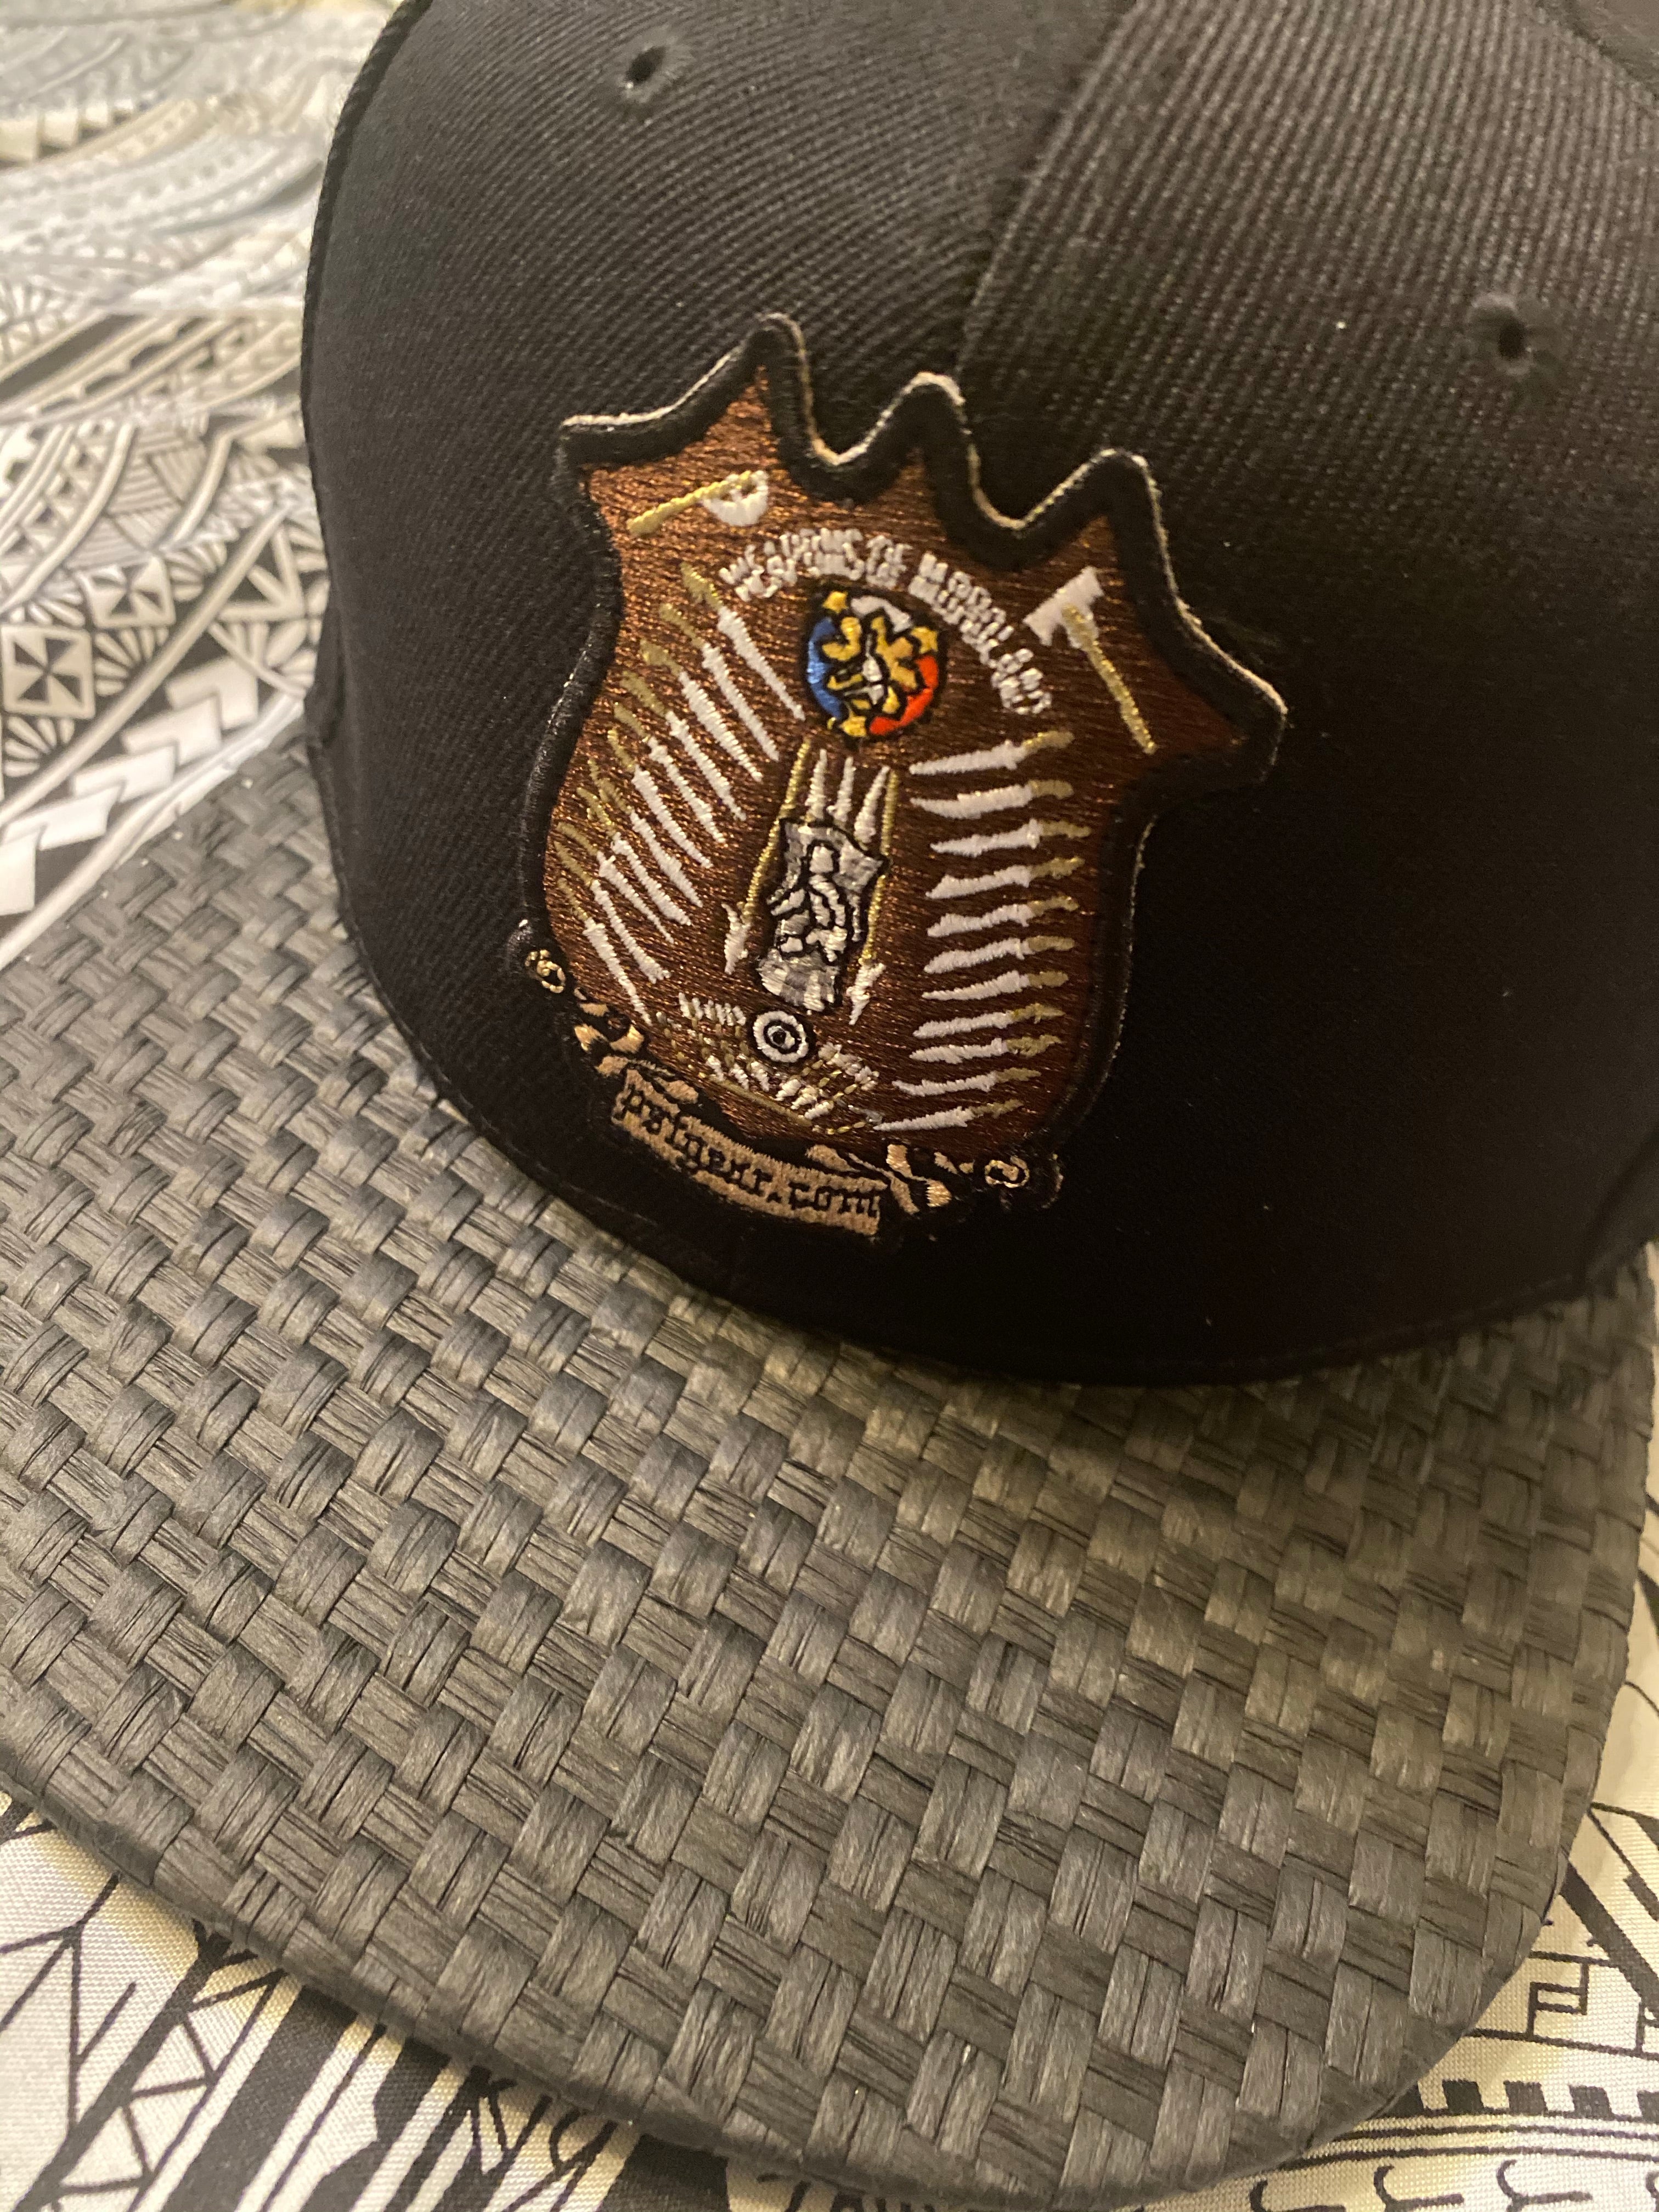 Weapons of Moroland Shield Snapback Collection